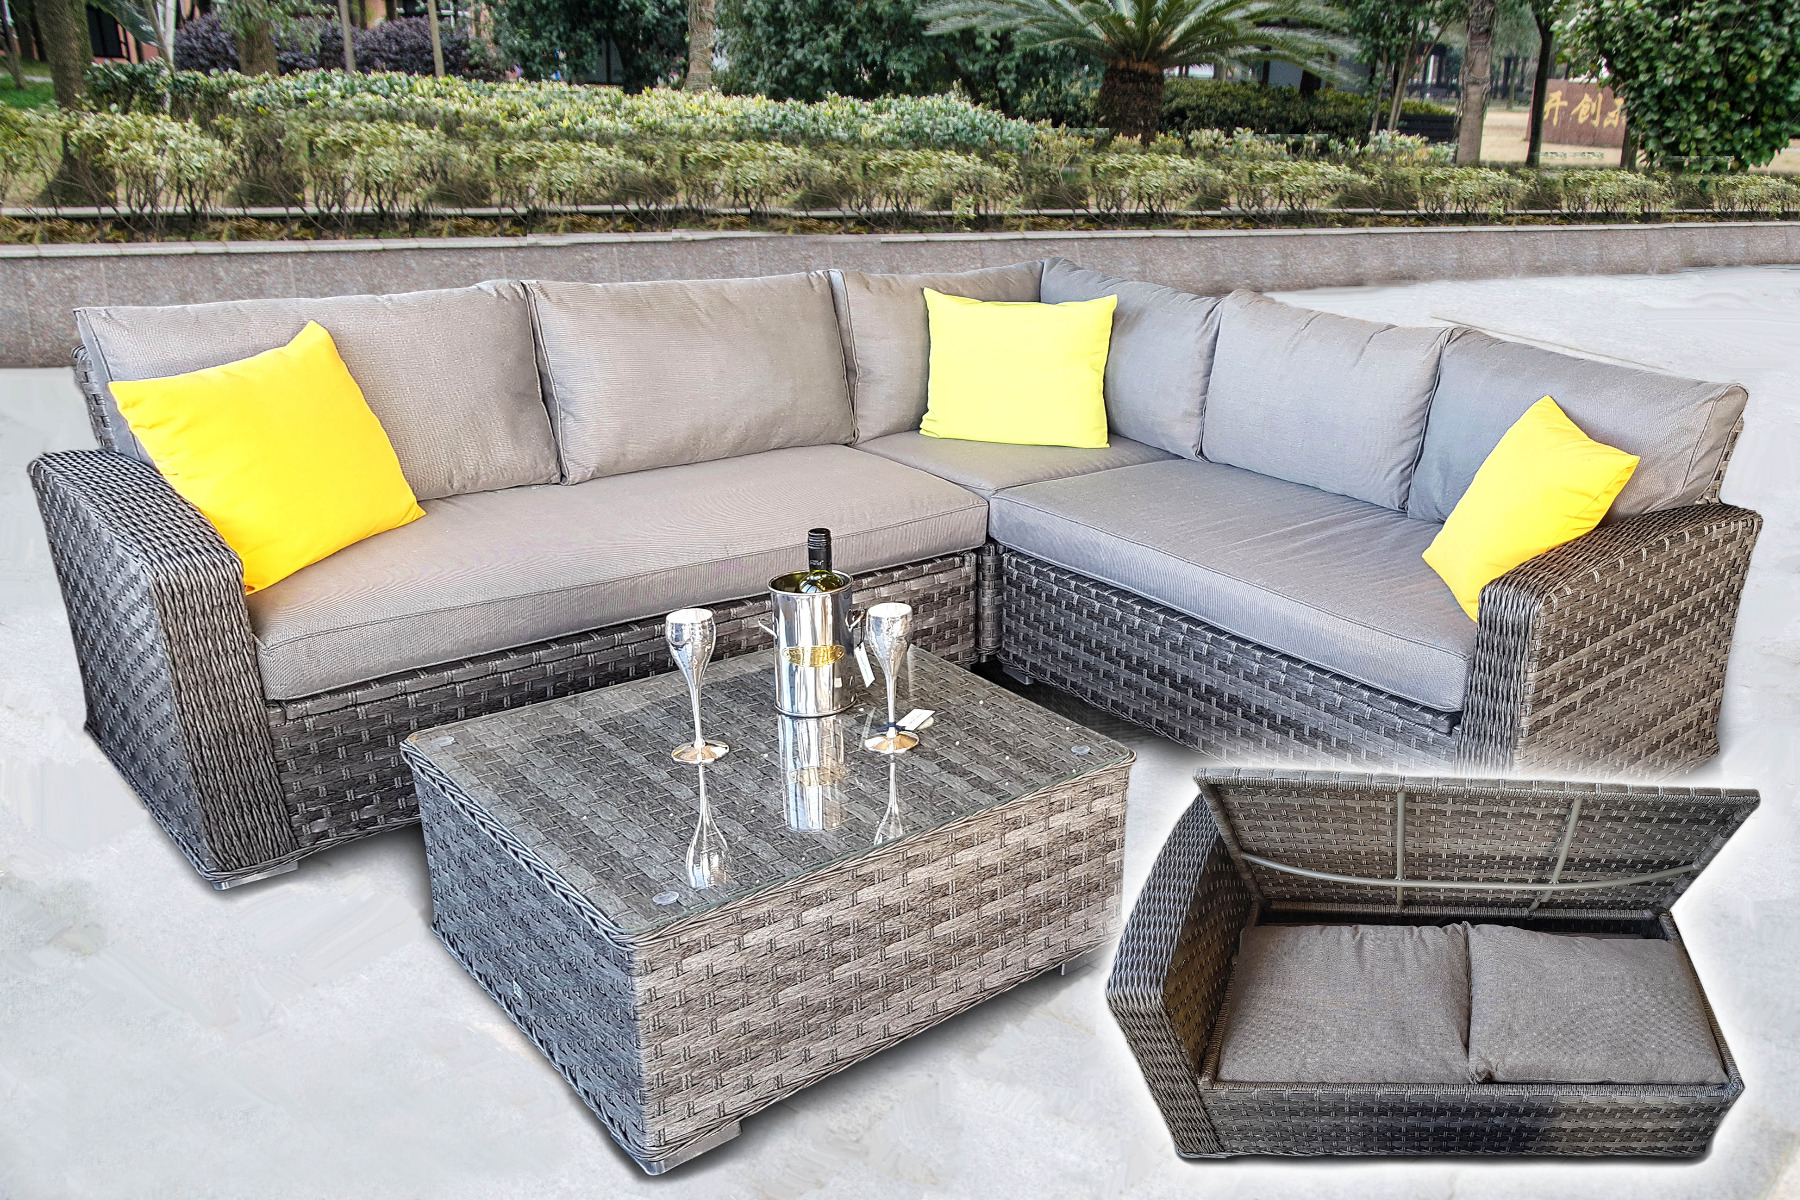 How To Protect Outdoor Rattan Furniture In Winter Blog - How To Preserve Outdoor Rattan Furniture